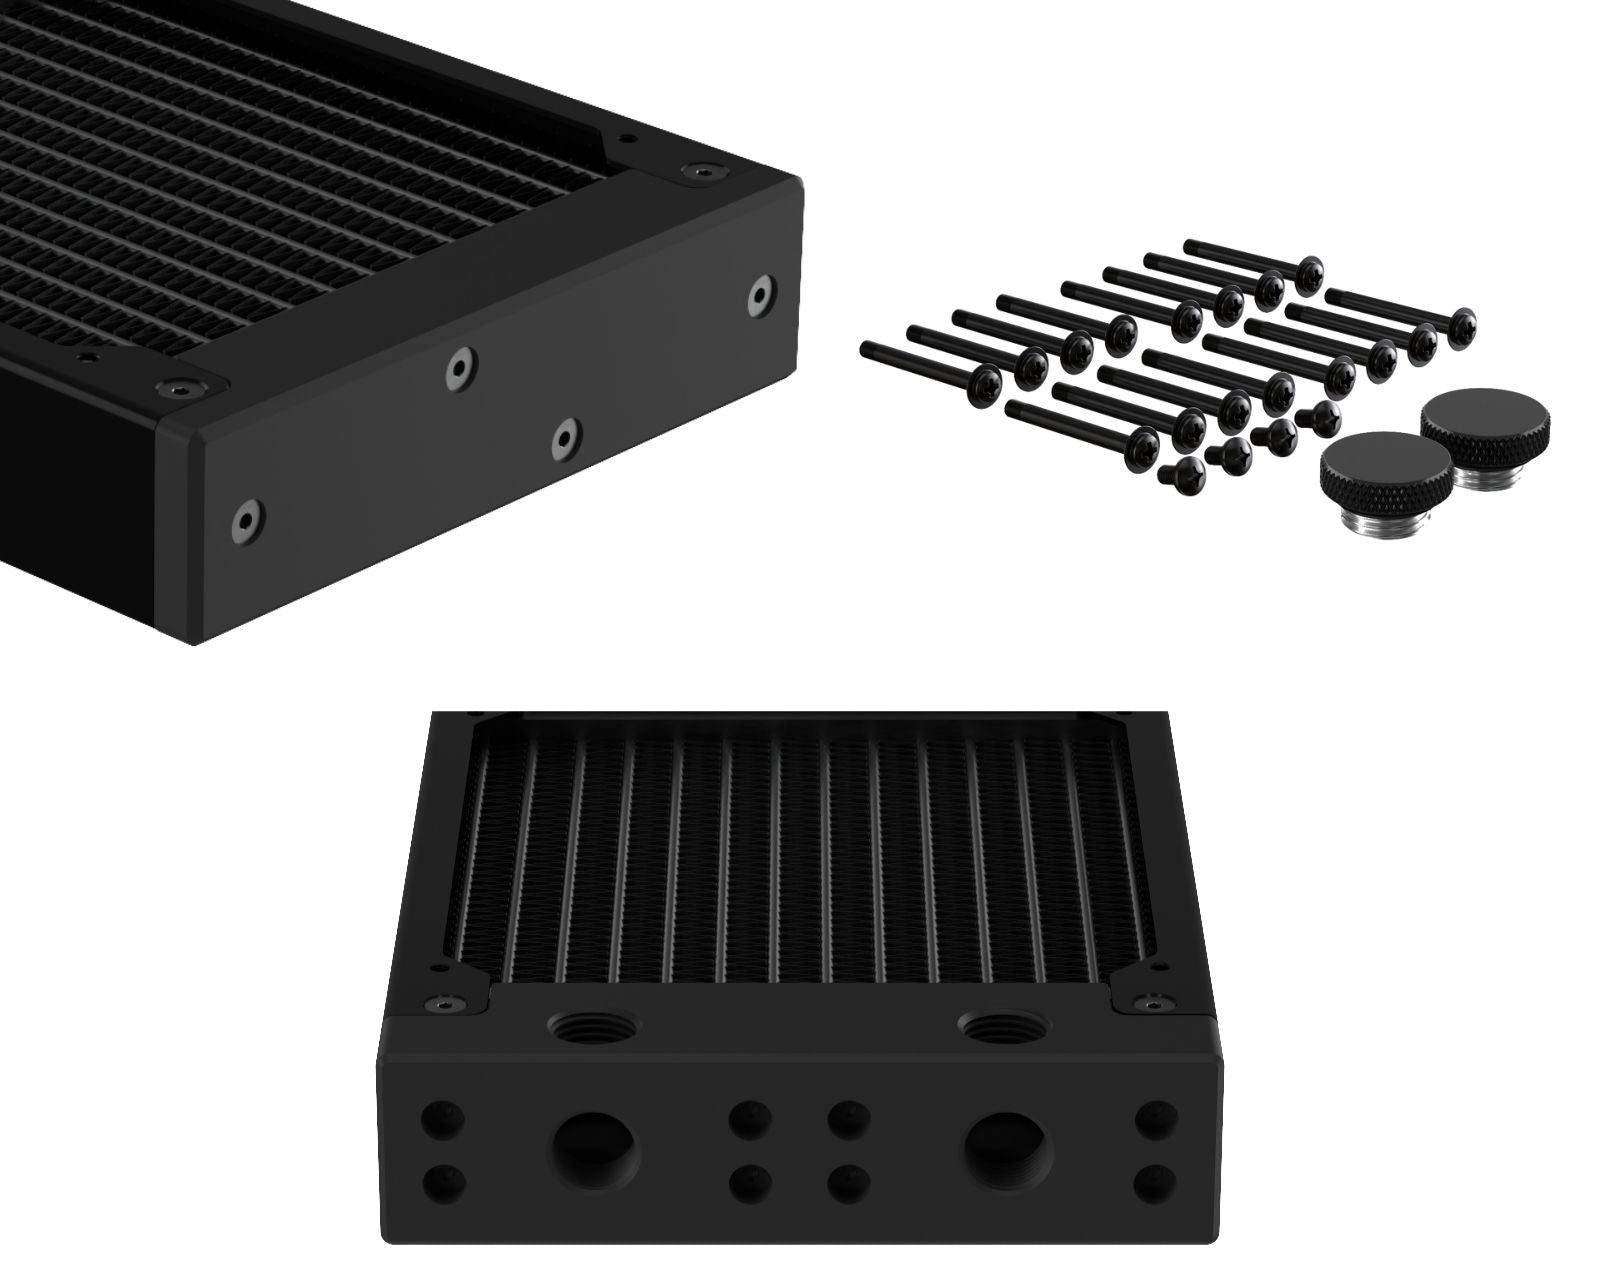 PrimoChill 480SL (30mm) EXIMO Modular Radiator, Black POM, 4x120mm, Quad Fan (R-SL-BK48) Available in 20+ Colors, Assembled in USA and Custom Watercooling Loop Ready - Satin Black